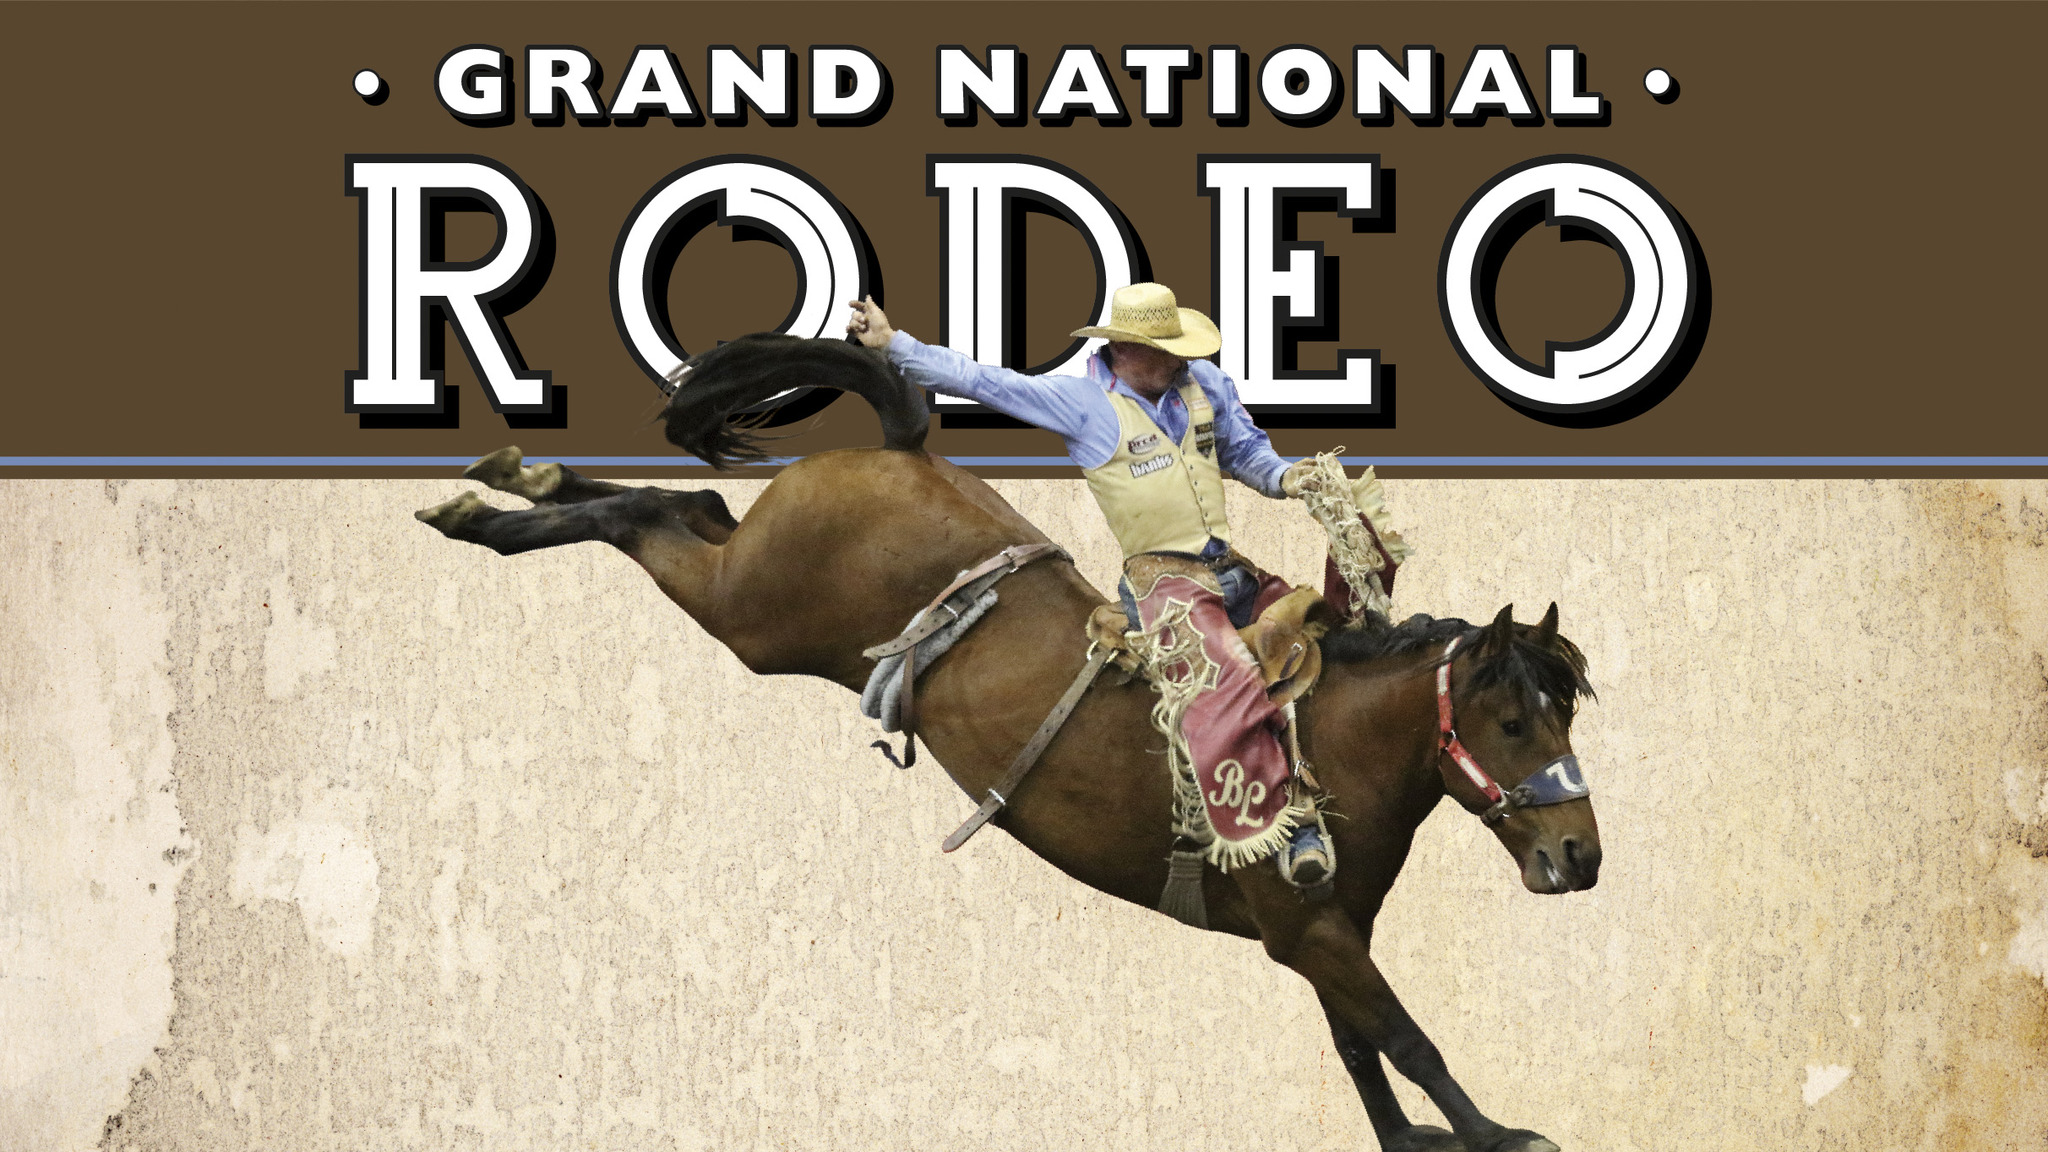 Grand National Rodeo Tickets Single Game Tickets & Schedule